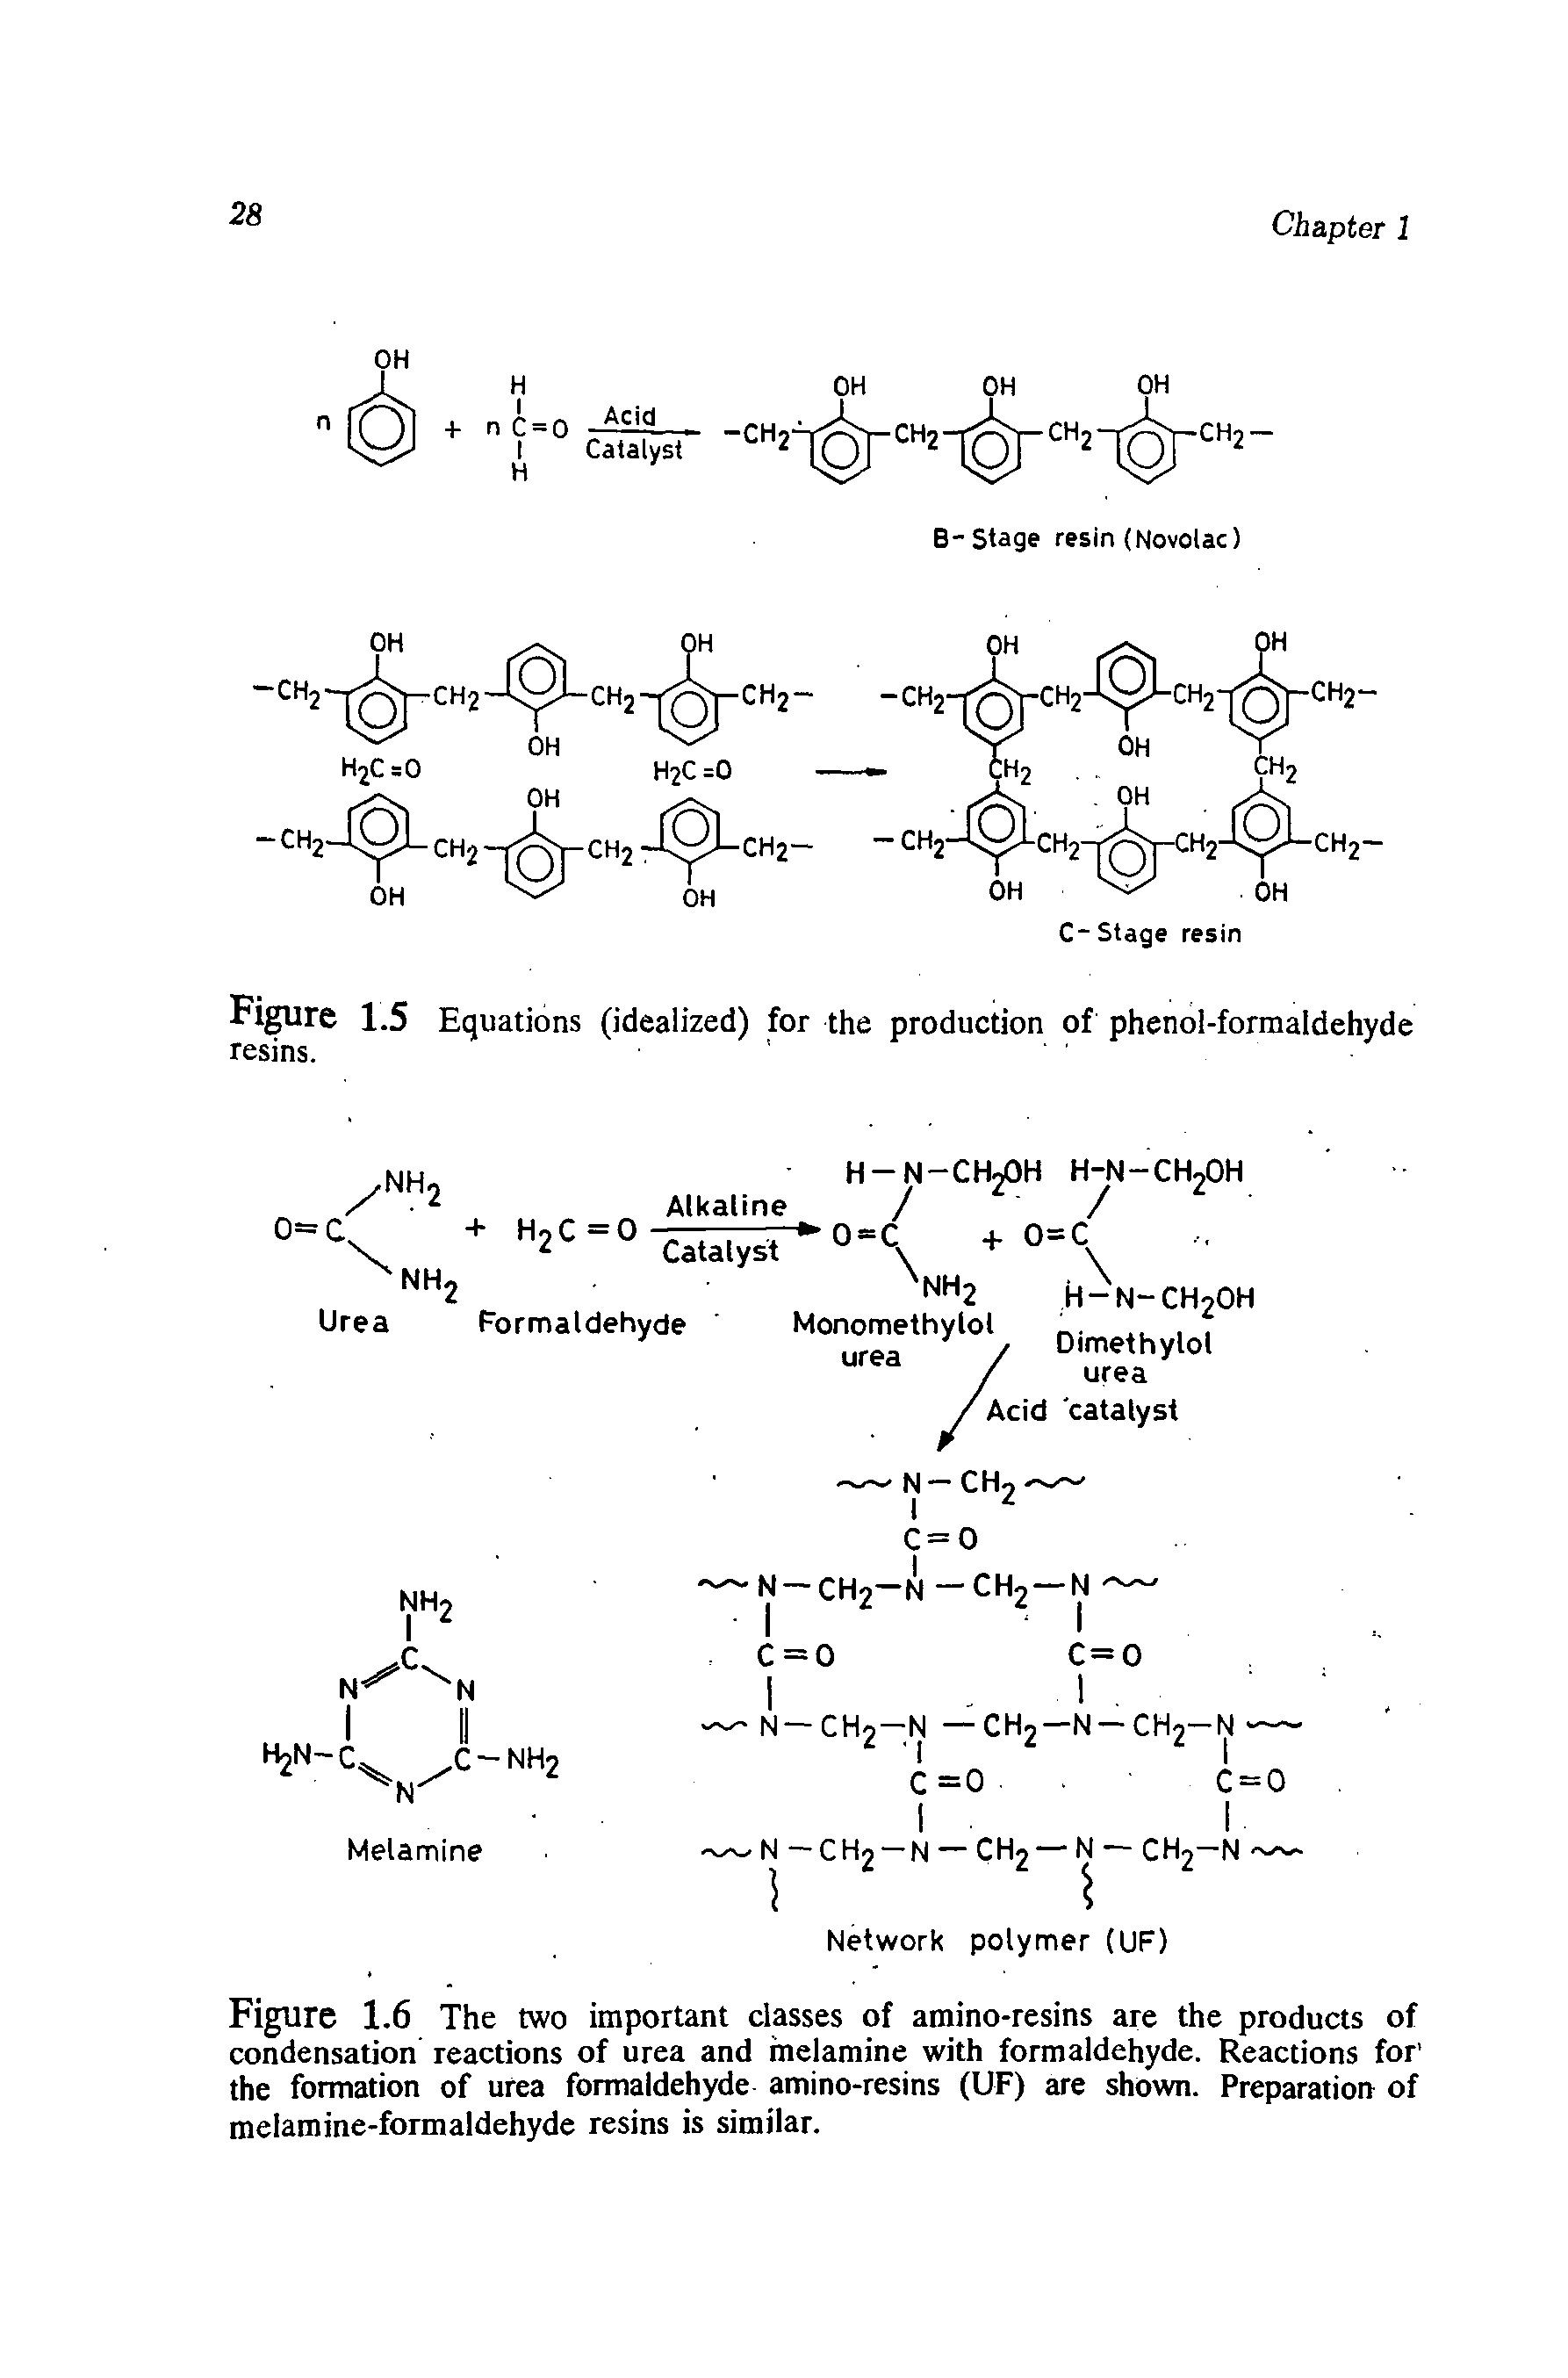 Figure 1.6 The two important classes of amino-resins are the products of condensation reactions of urea and melamine with formaldehyde. Reactions for the formation of urea formaldehyde amino-resins (UF) are shown. Preparation of melamine-formaldehyde resins is similar.